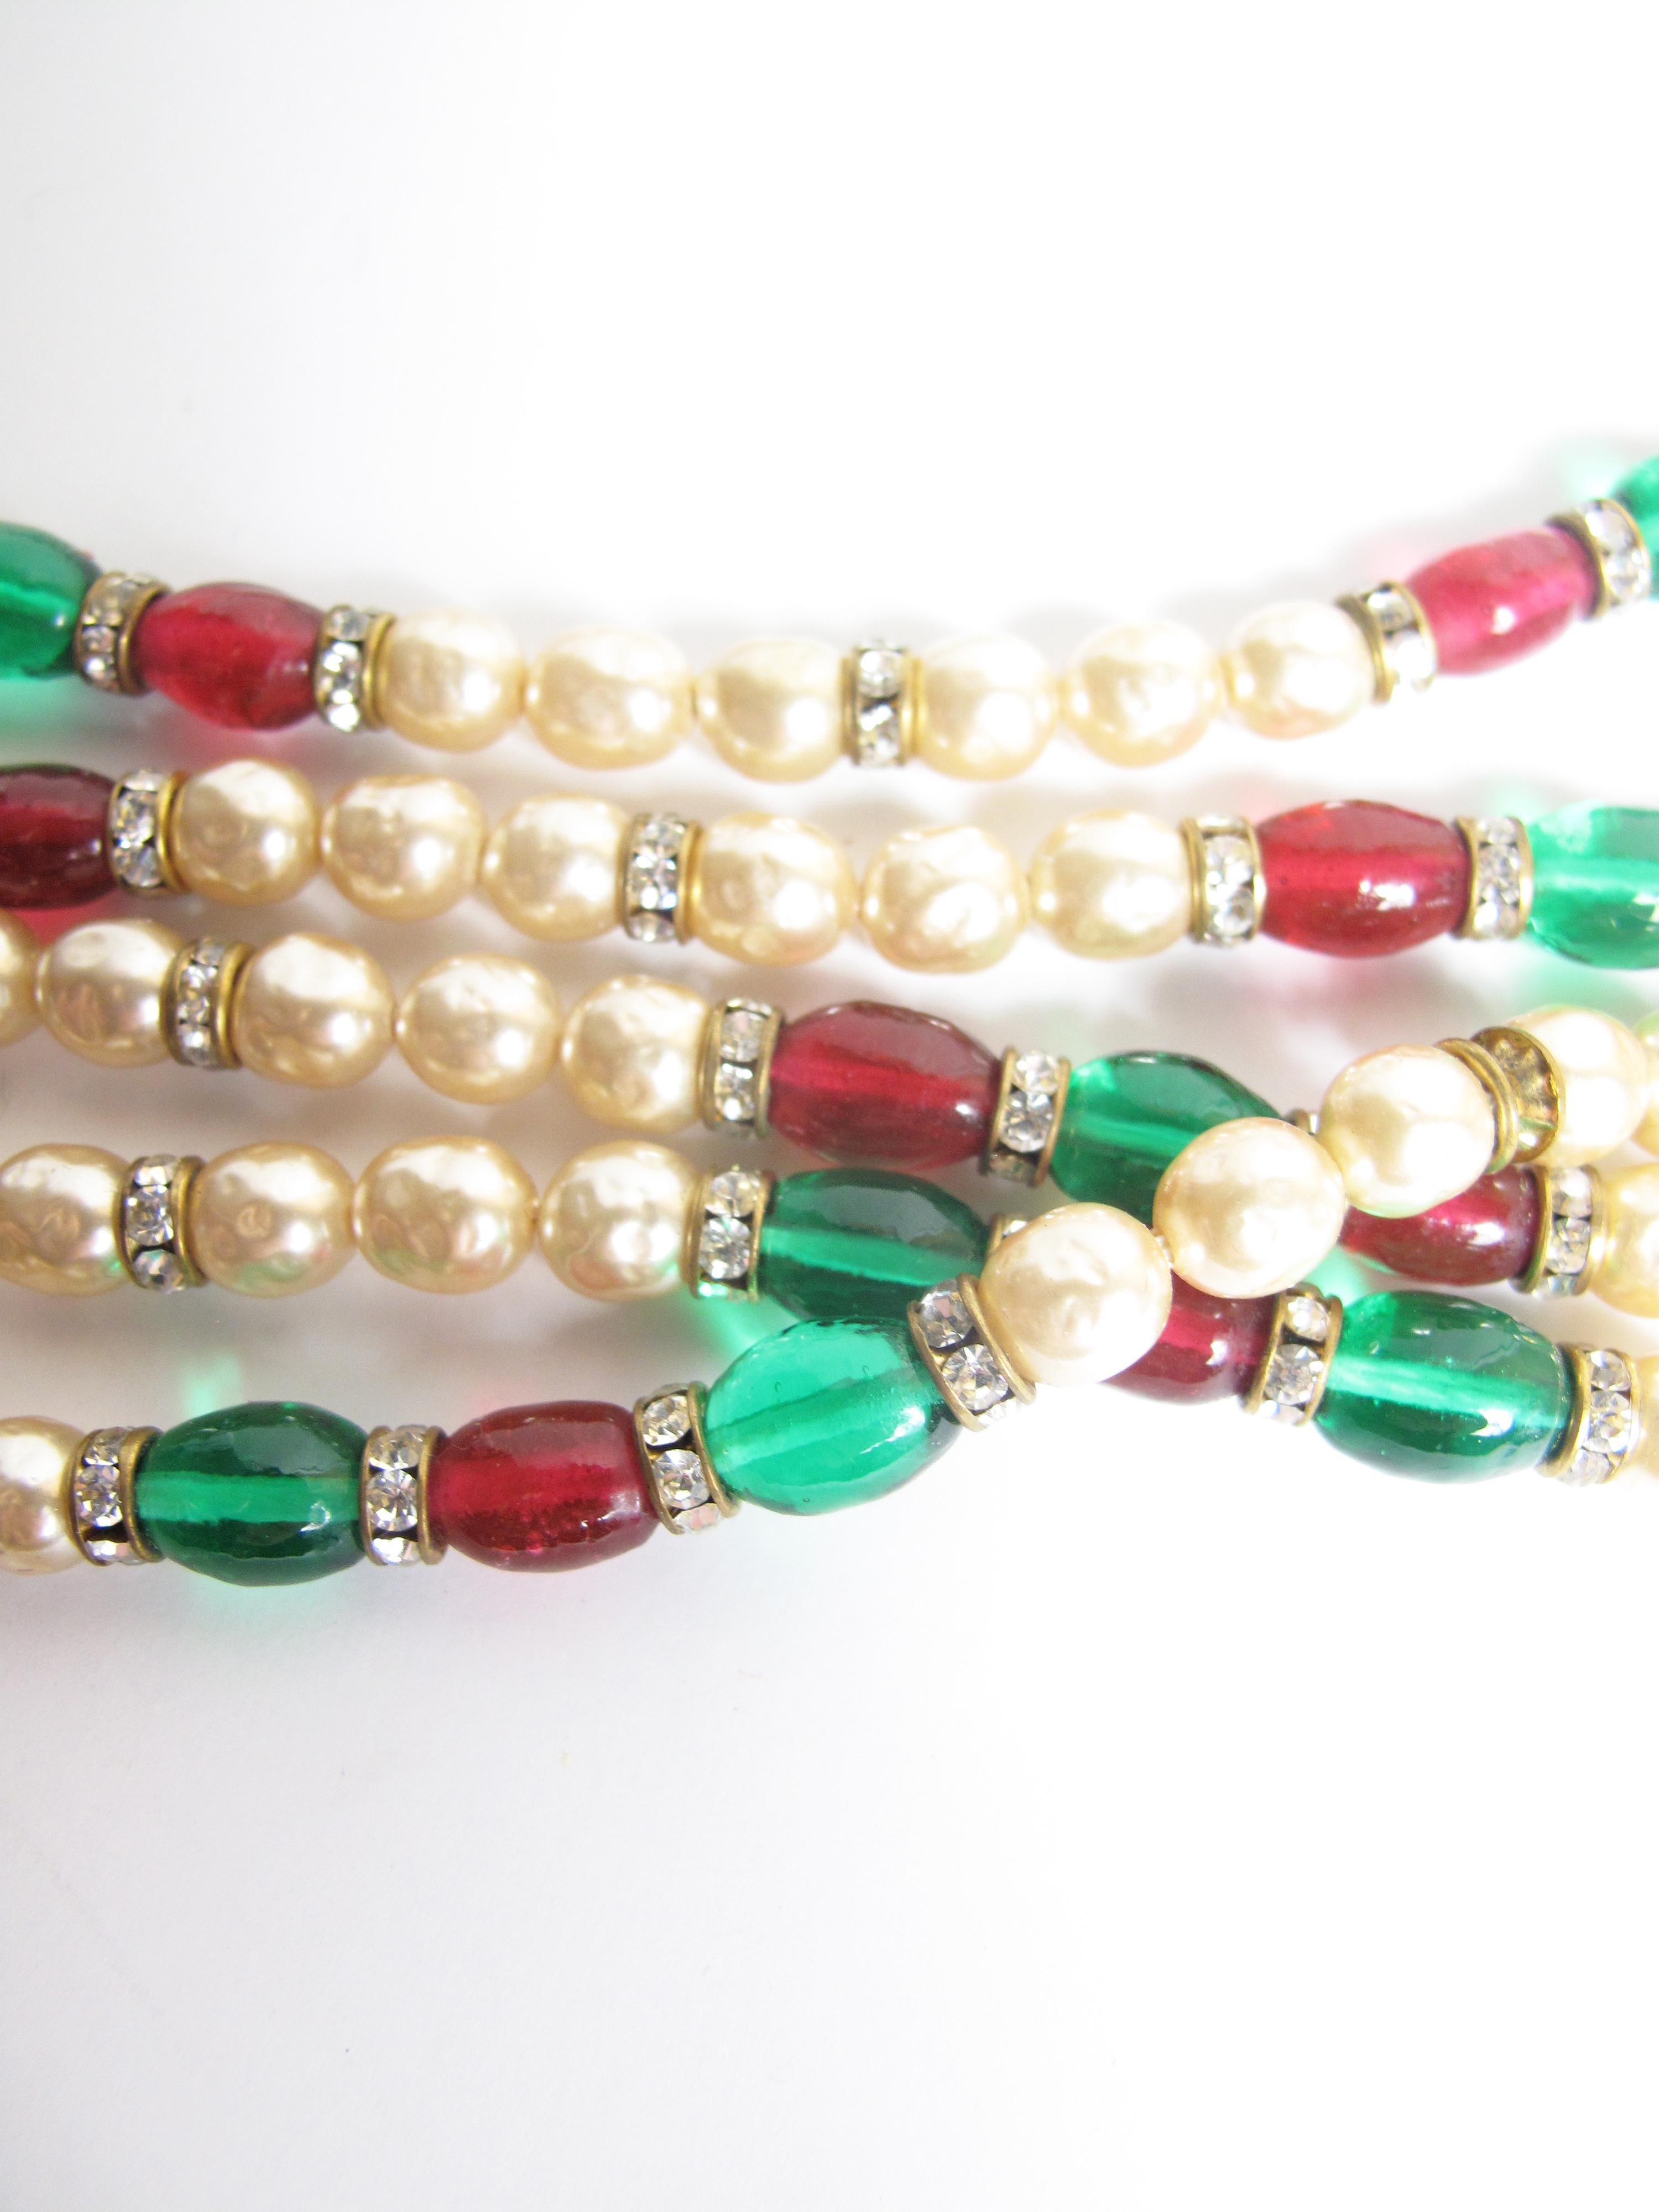 Women's or Men's 1970s Chanel Multi-strand Gripoix, Faux Pearls and Crystal Necklace